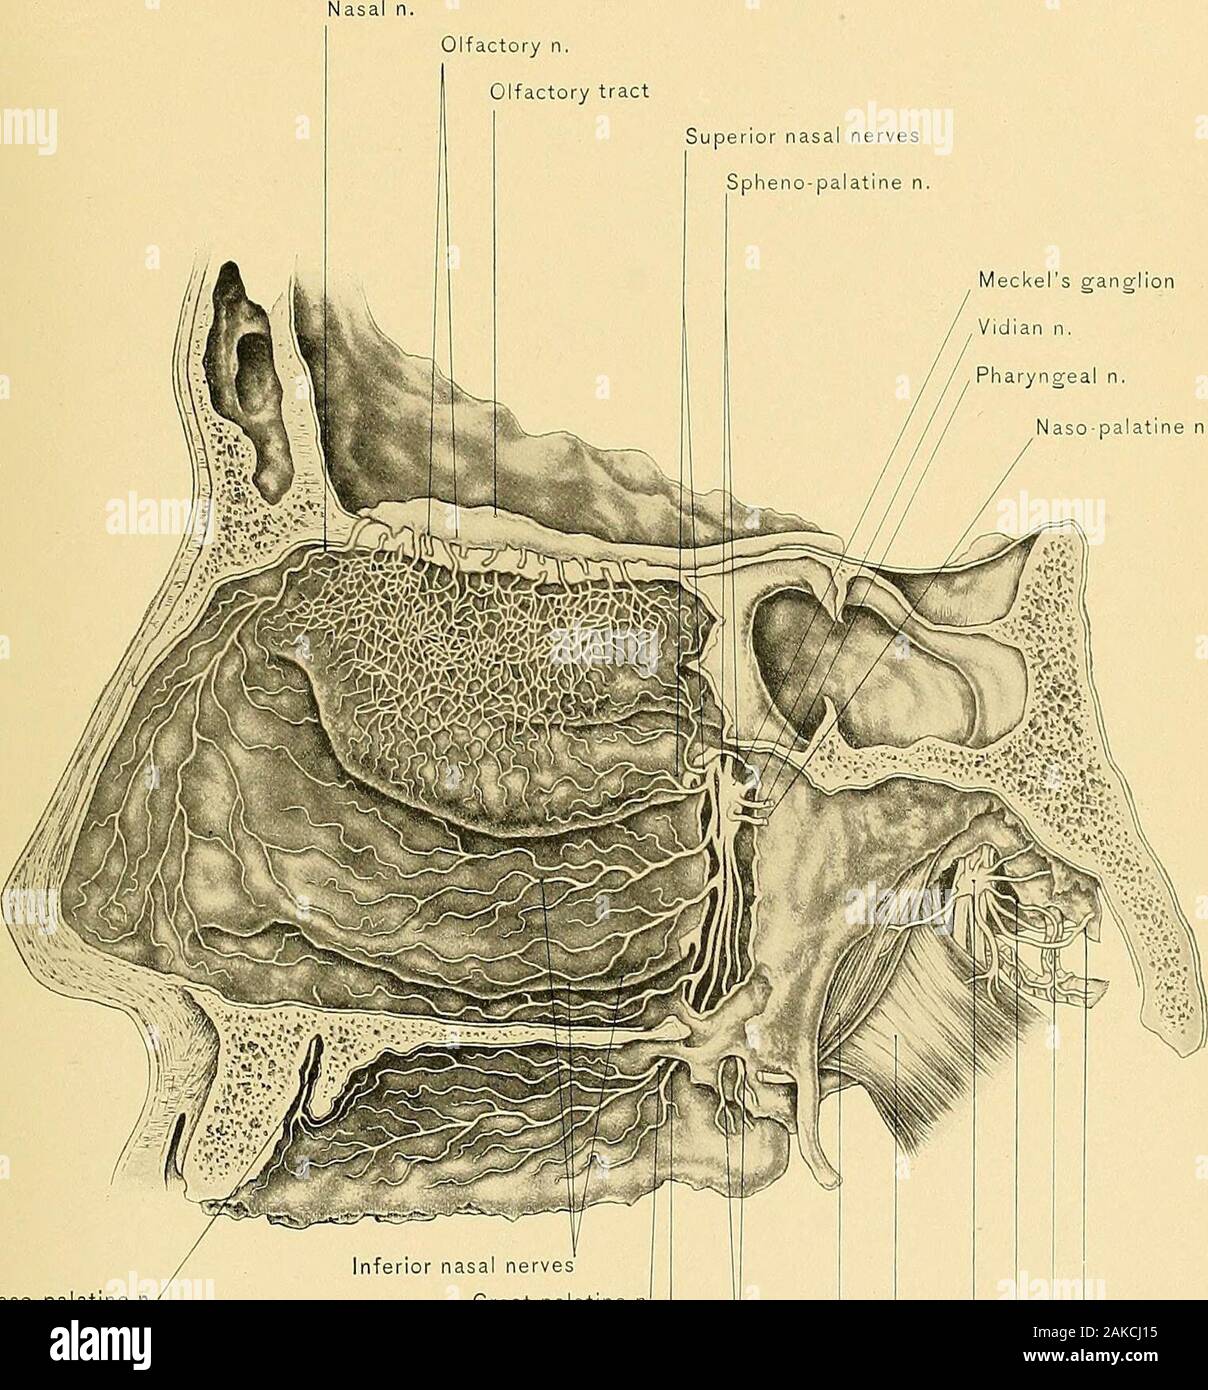 Surgical anatomy : a treatise on human anatomy in its application to the practice of medicine and surgery . f thecrista galli, runs downward in the groove on the internal surface of the nasal bone,and passes forward between the nasal bone and the upper lateral cartilage to sup-ply the tip of the nose. It supplies branches to the anterior portion of both theouter Avail and the septum of the nose. The naso-palatine nerve is a branch of Meckels ganglion, and enters thenasal fossa with the naso-palatine artery at the spheno-palatiire foramen. It crosseson the body of the sphenoid bone to the septu Stock Photo